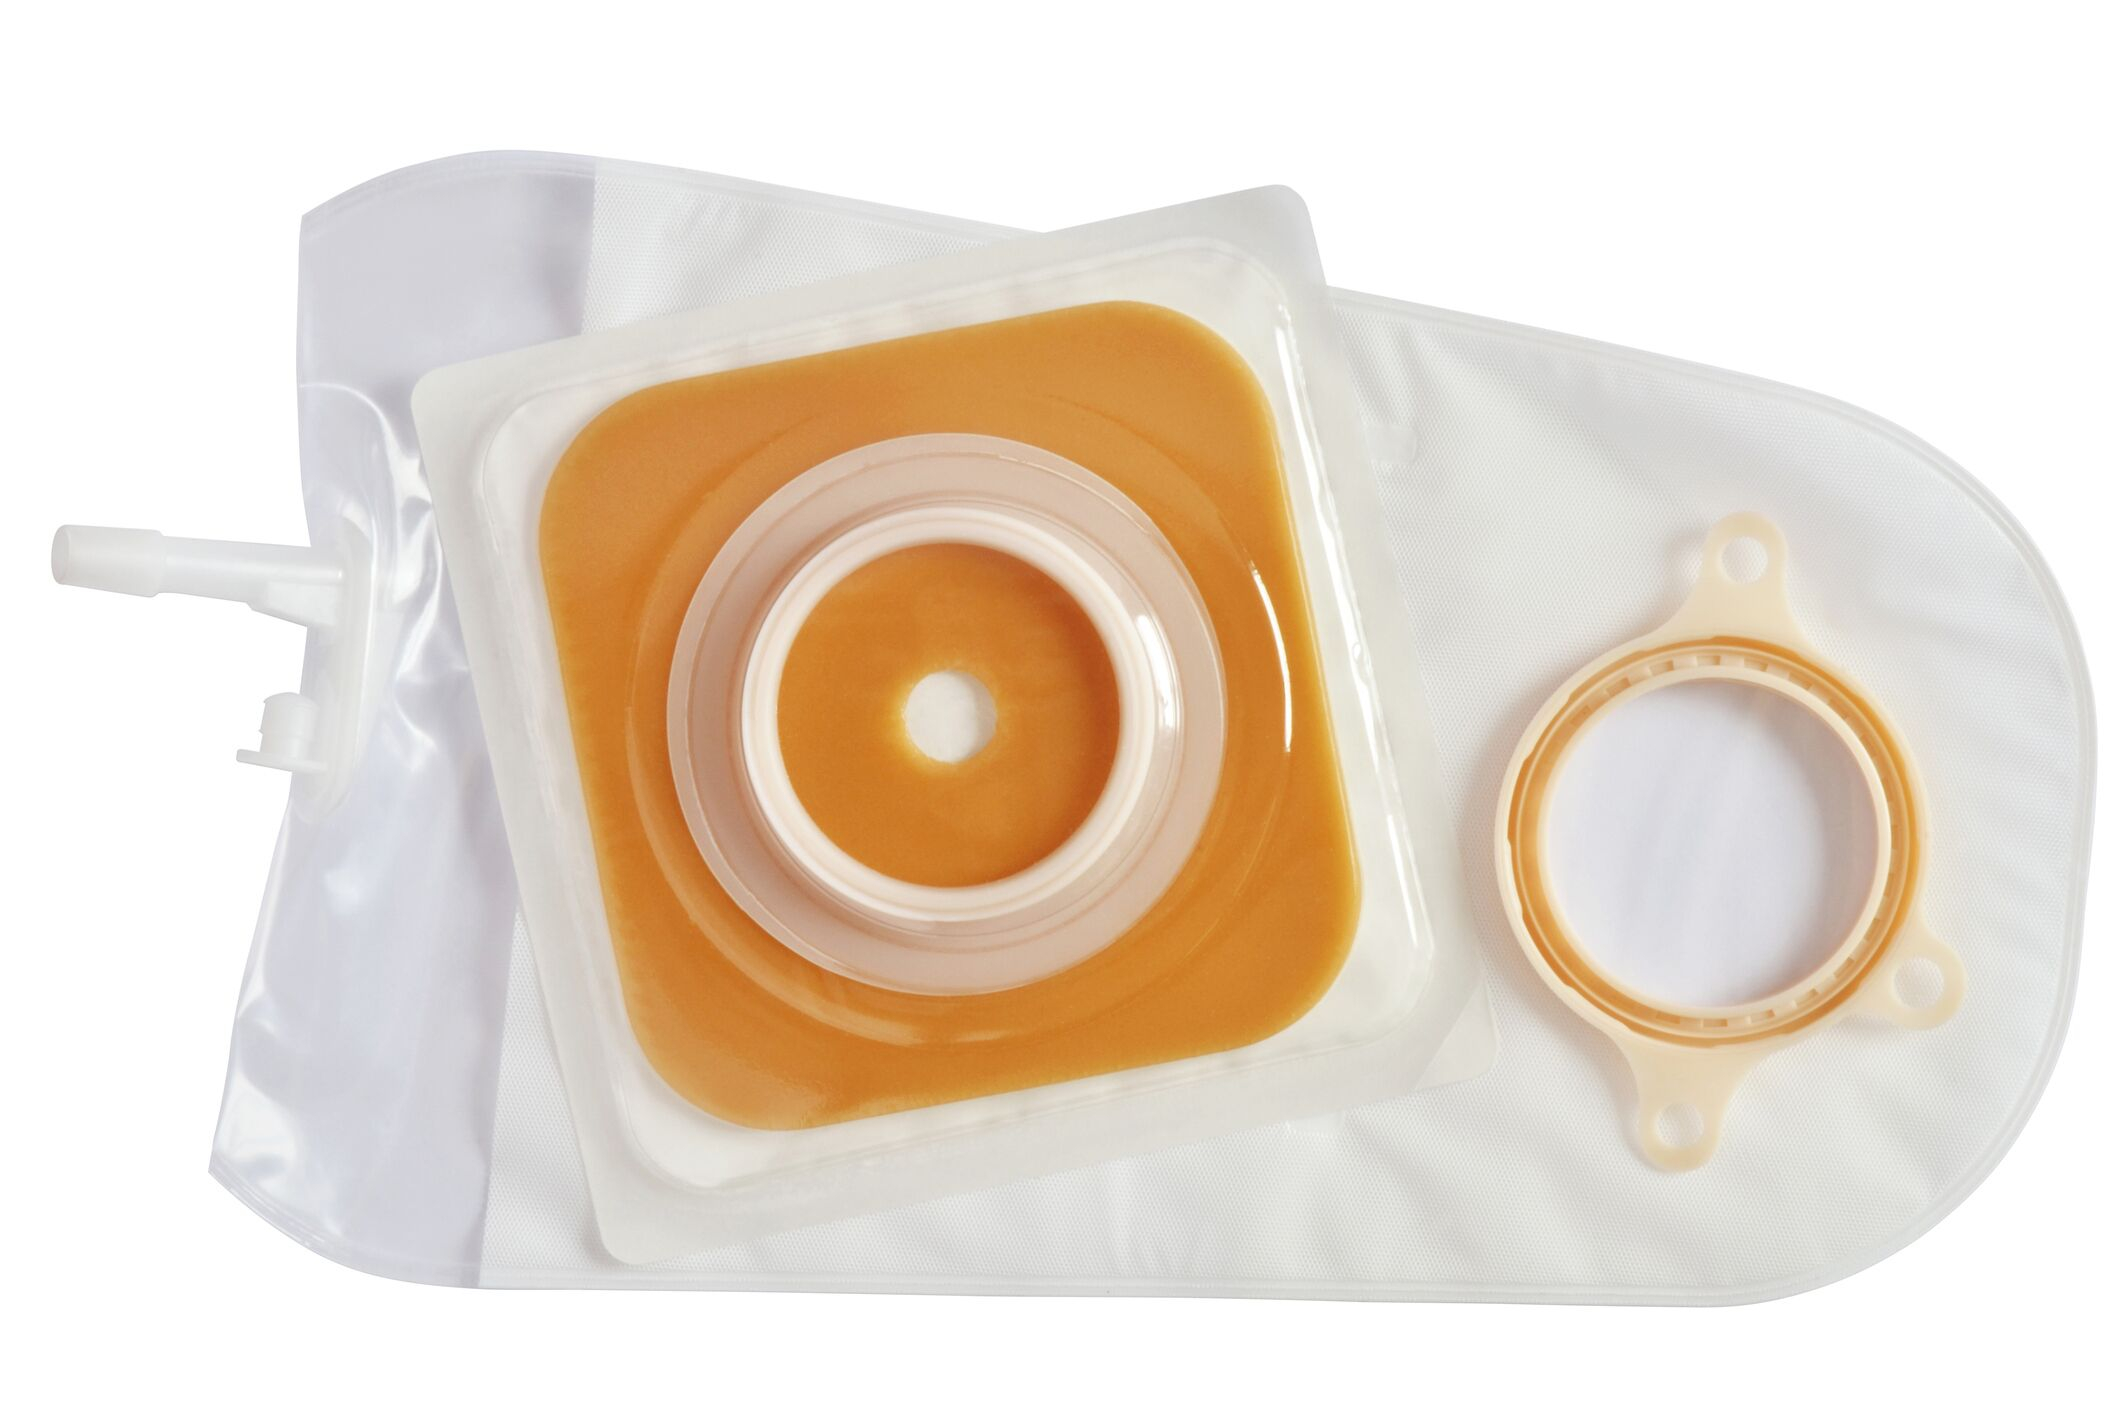 Ostomy: What Is It and Where Can I Buy Ostomy Products in Canada?